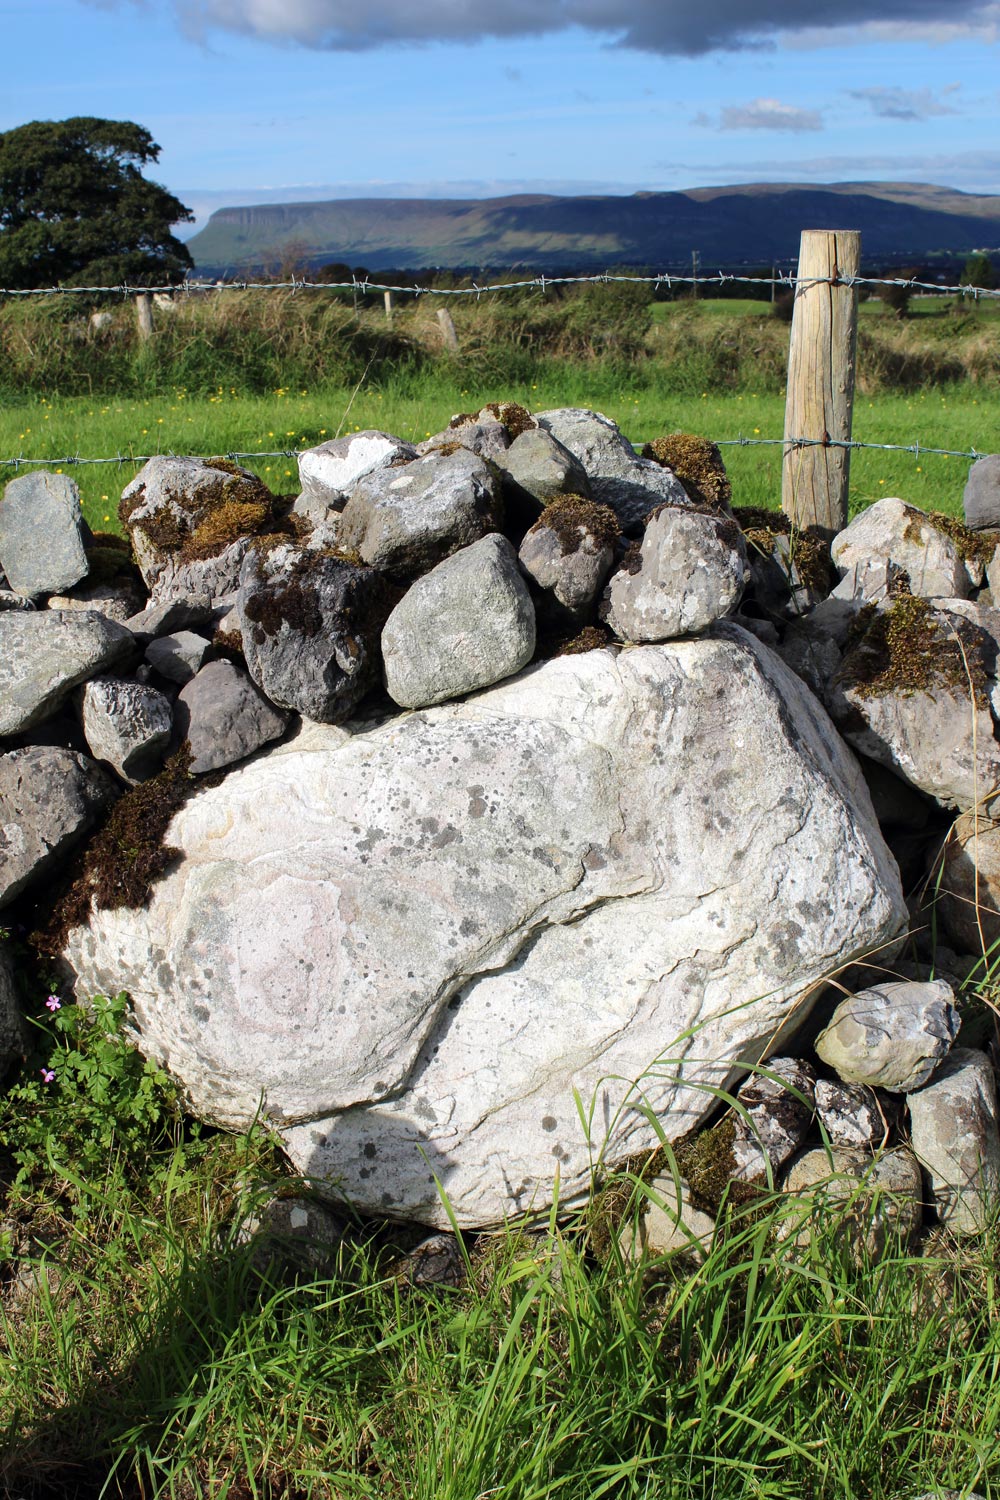 Many stone circles in Carrowmore were dismantled to build field walls.